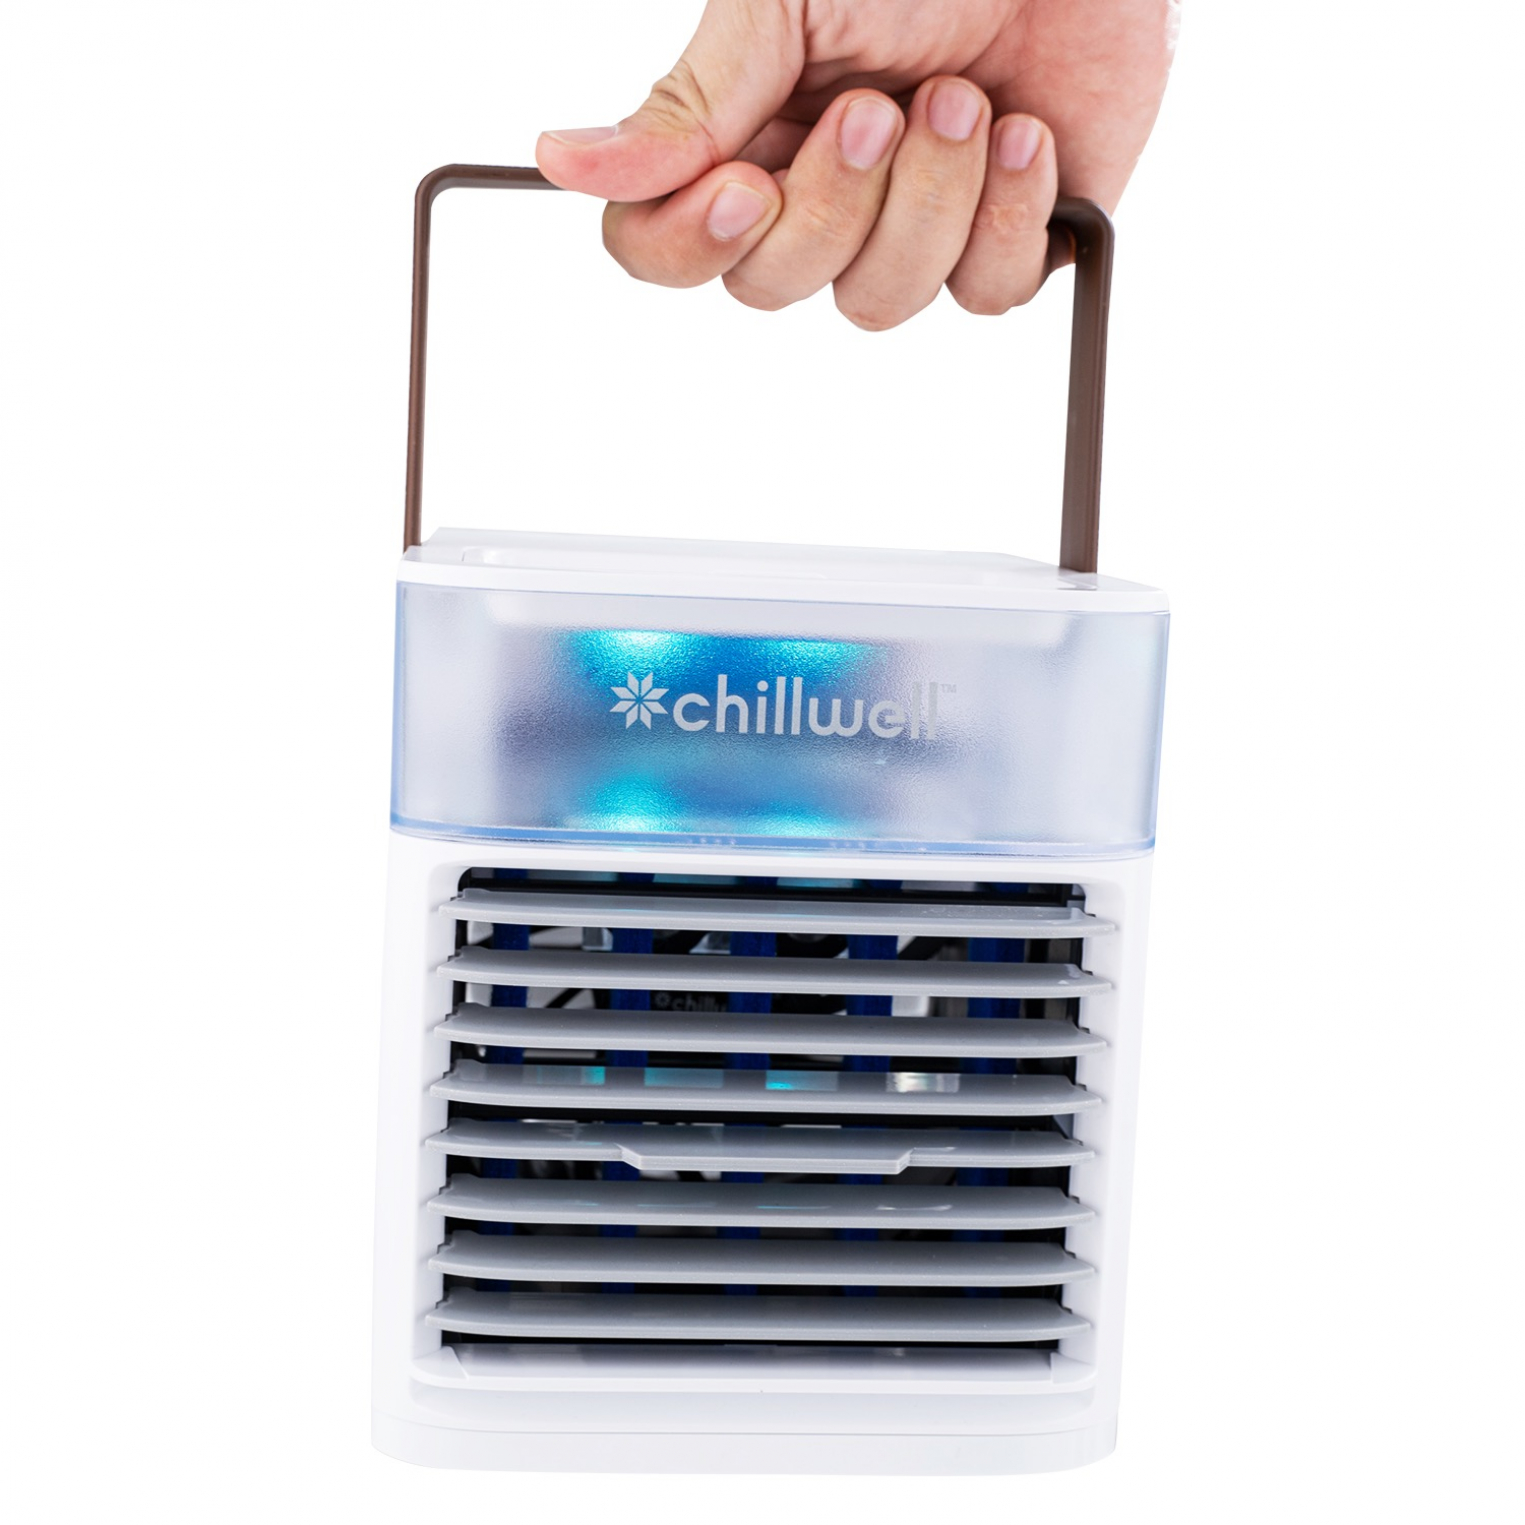 Chillwell AC User Reviews